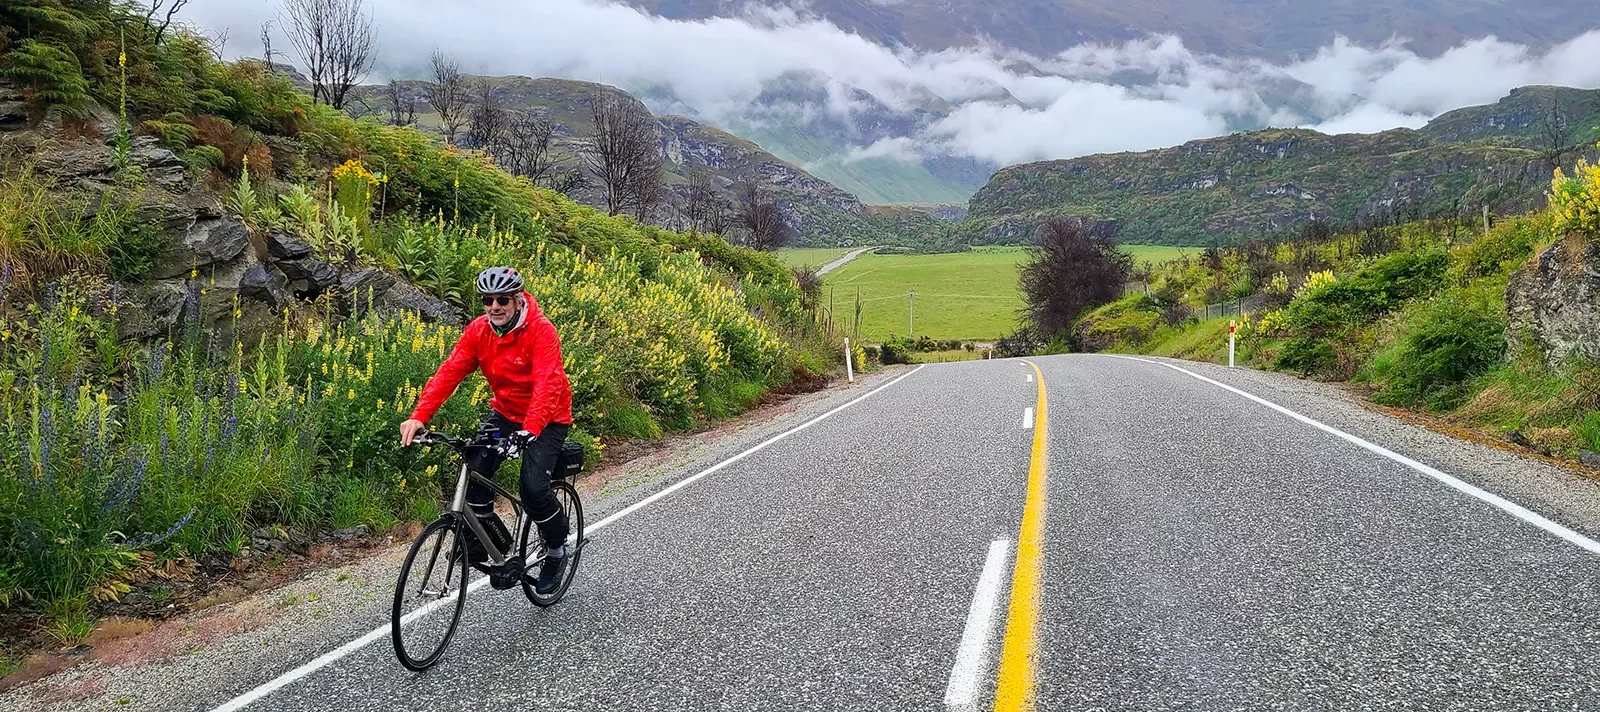 Bikers riding along a paved road in New Zealand